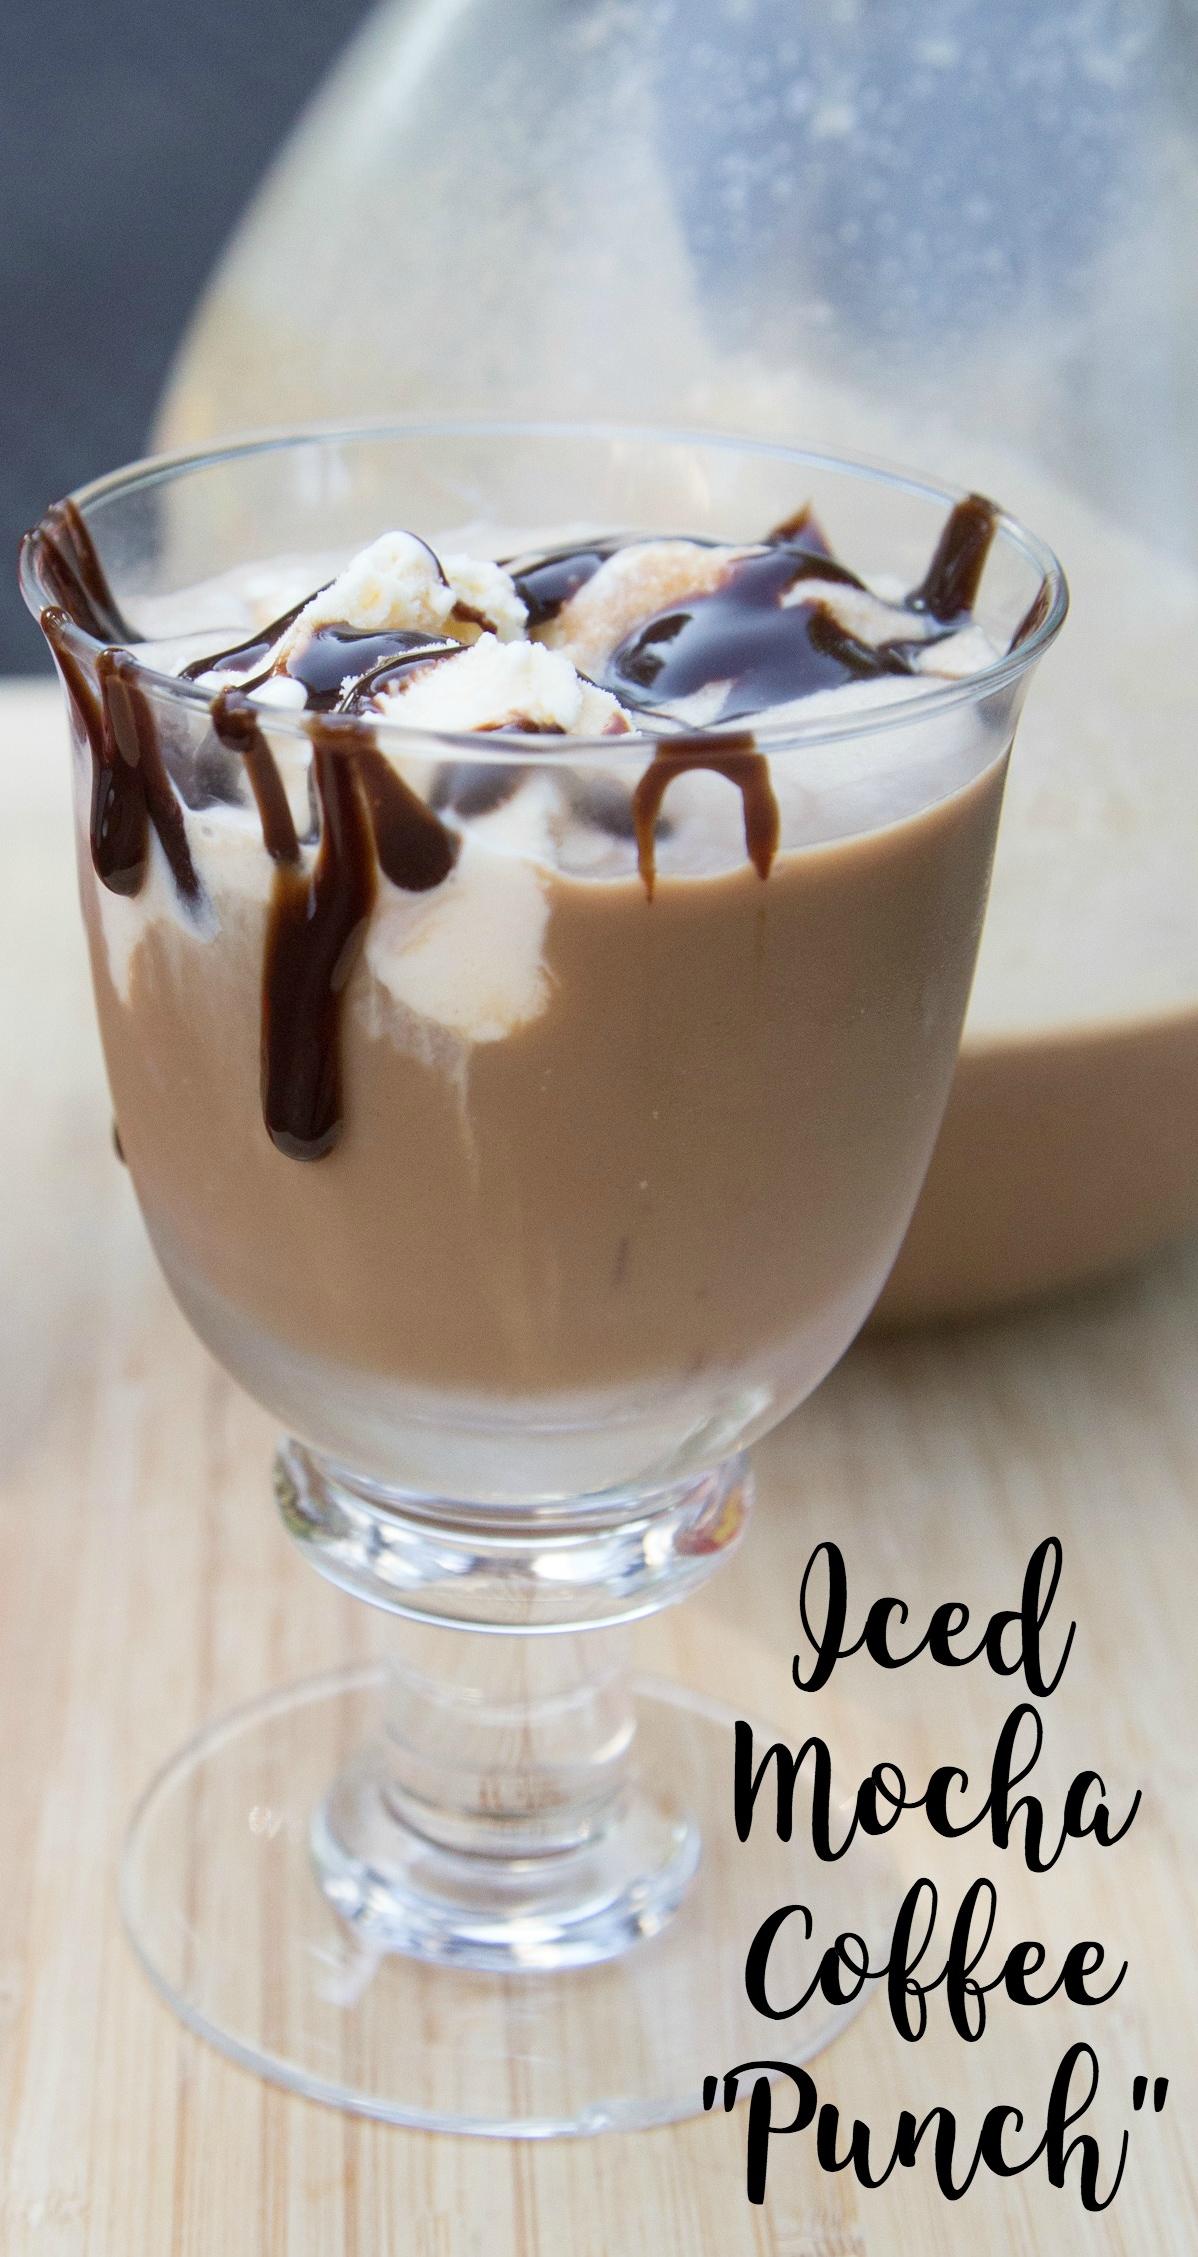  Cool down in style with this decadent Mocha Punch.